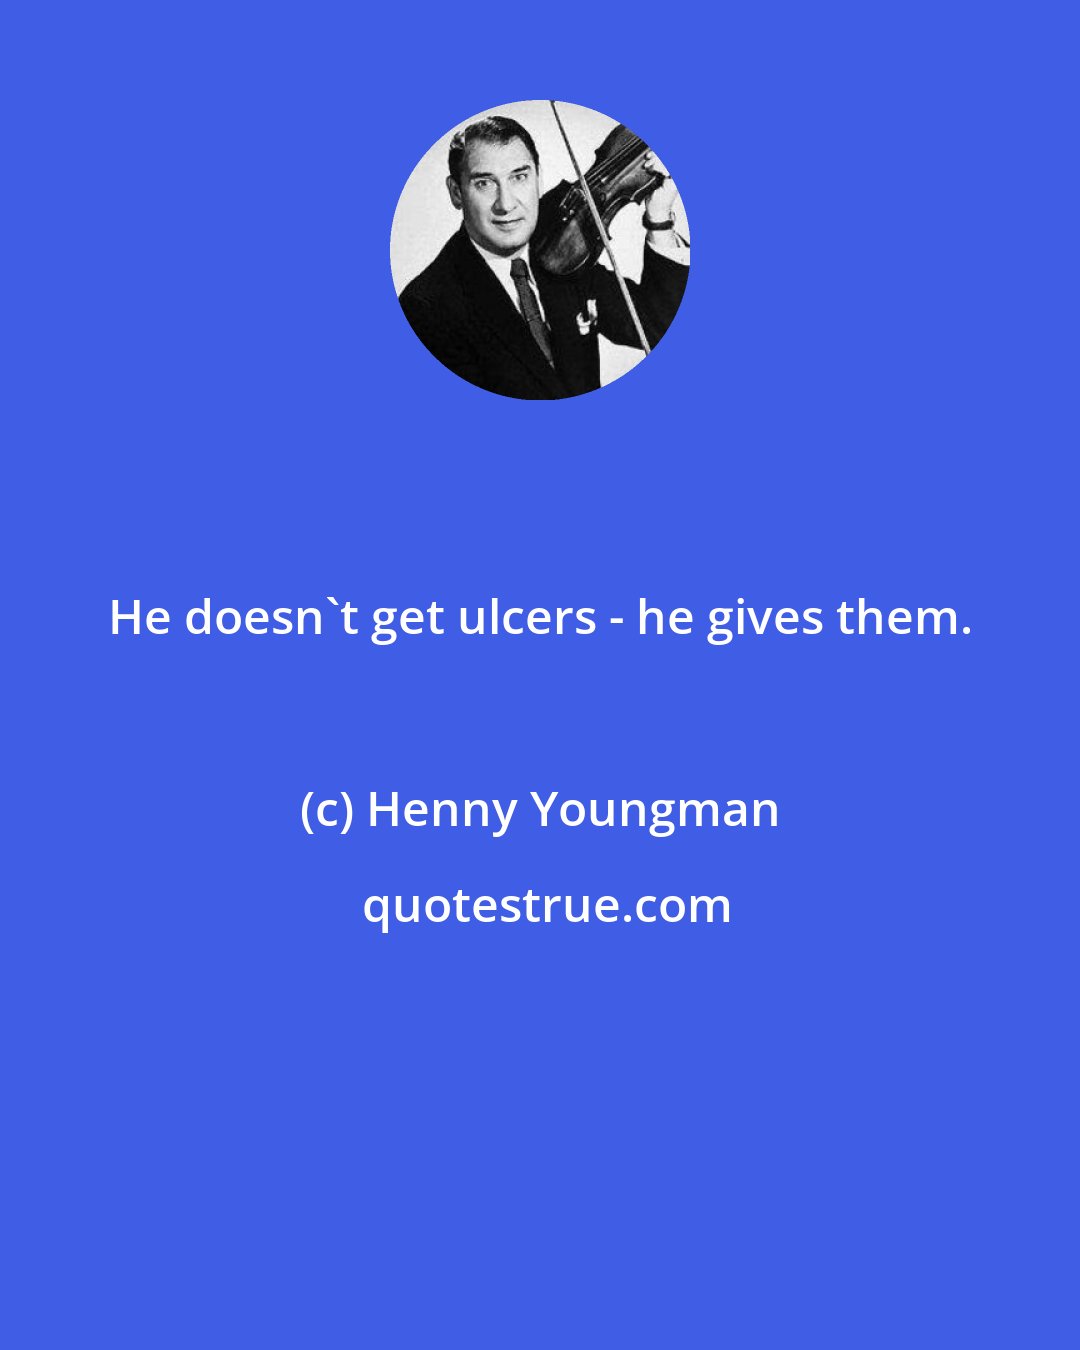 Henny Youngman: He doesn't get ulcers - he gives them.